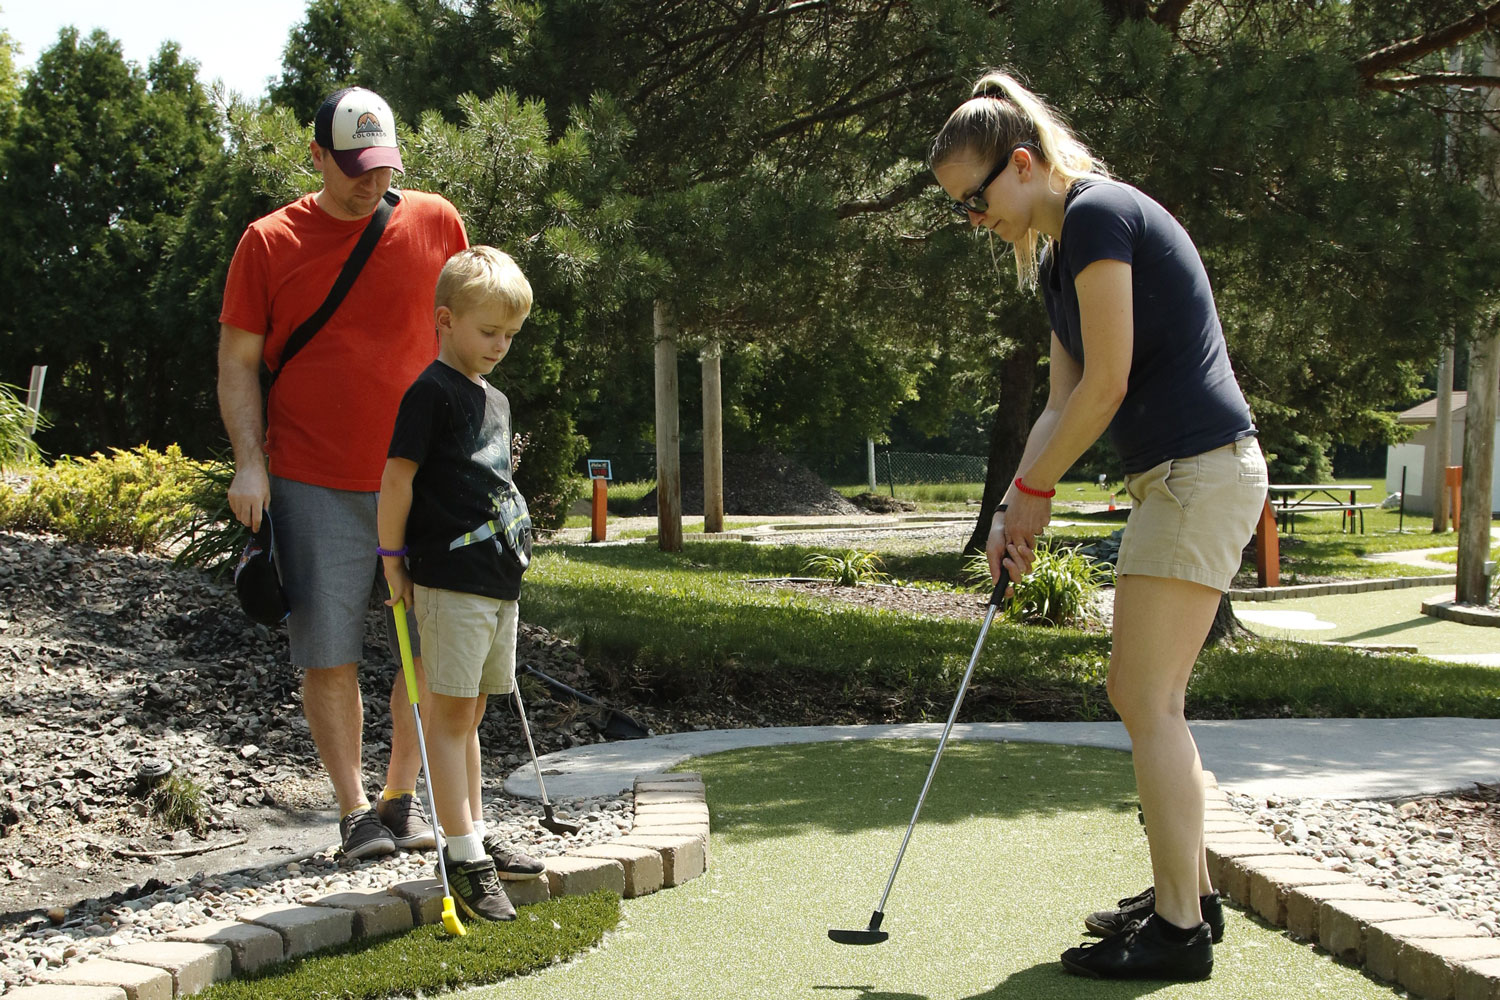 Dad and son watch mom putt on an AGS mini golf hole at Veterans Memorial Park in Richfield, MN